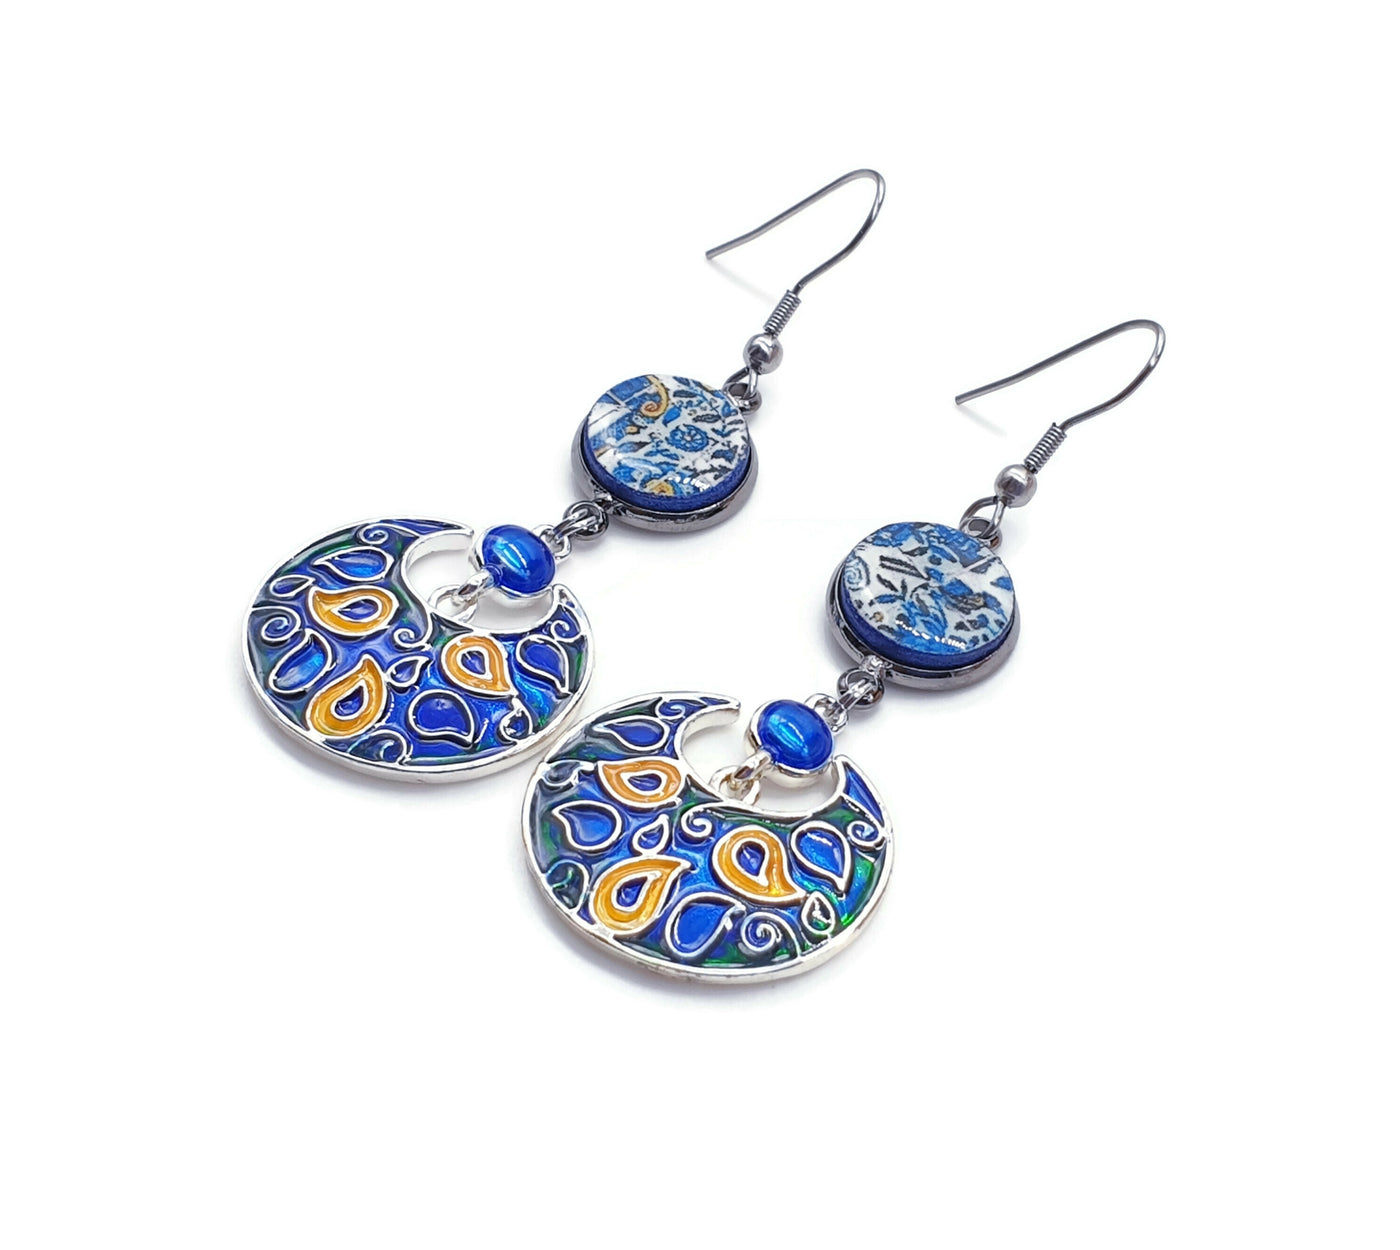 YVONNE -Turkish Moon Earrings - COIMBRA Portugal 17th Century Pottery